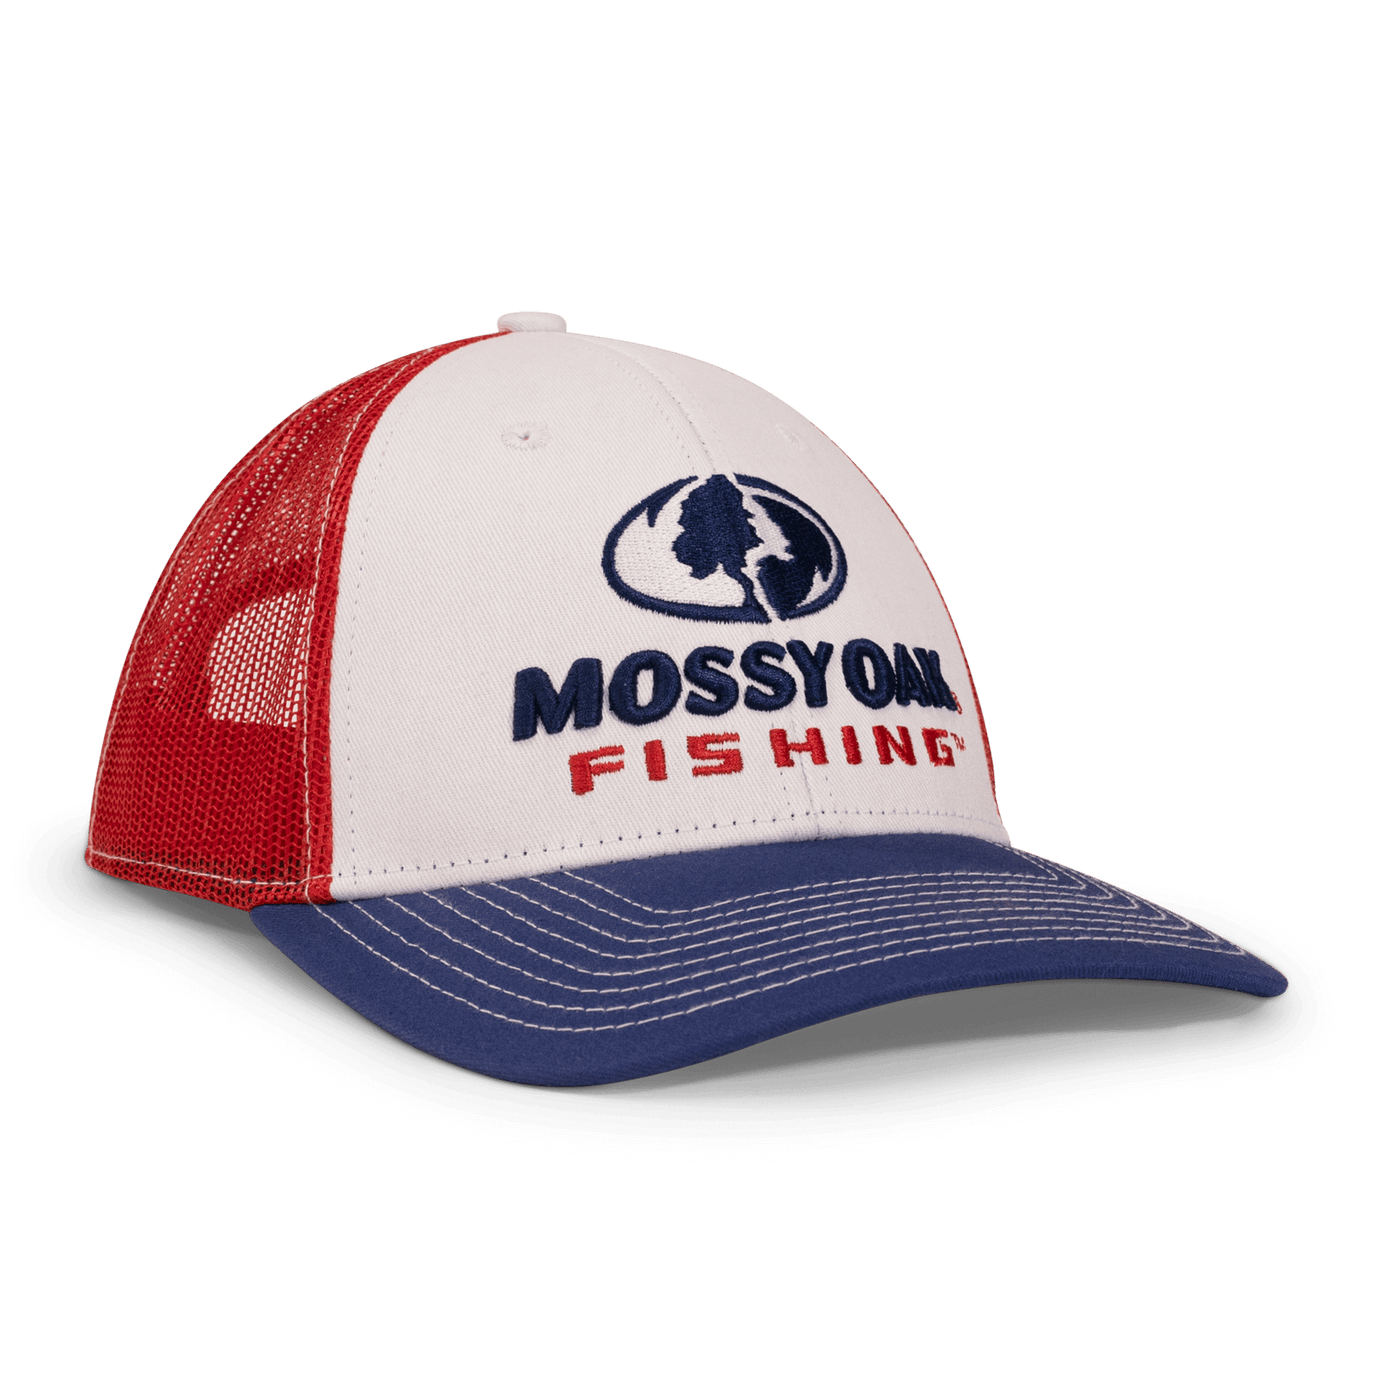 Mossy Oak Red, White and Blue Fishing Hat